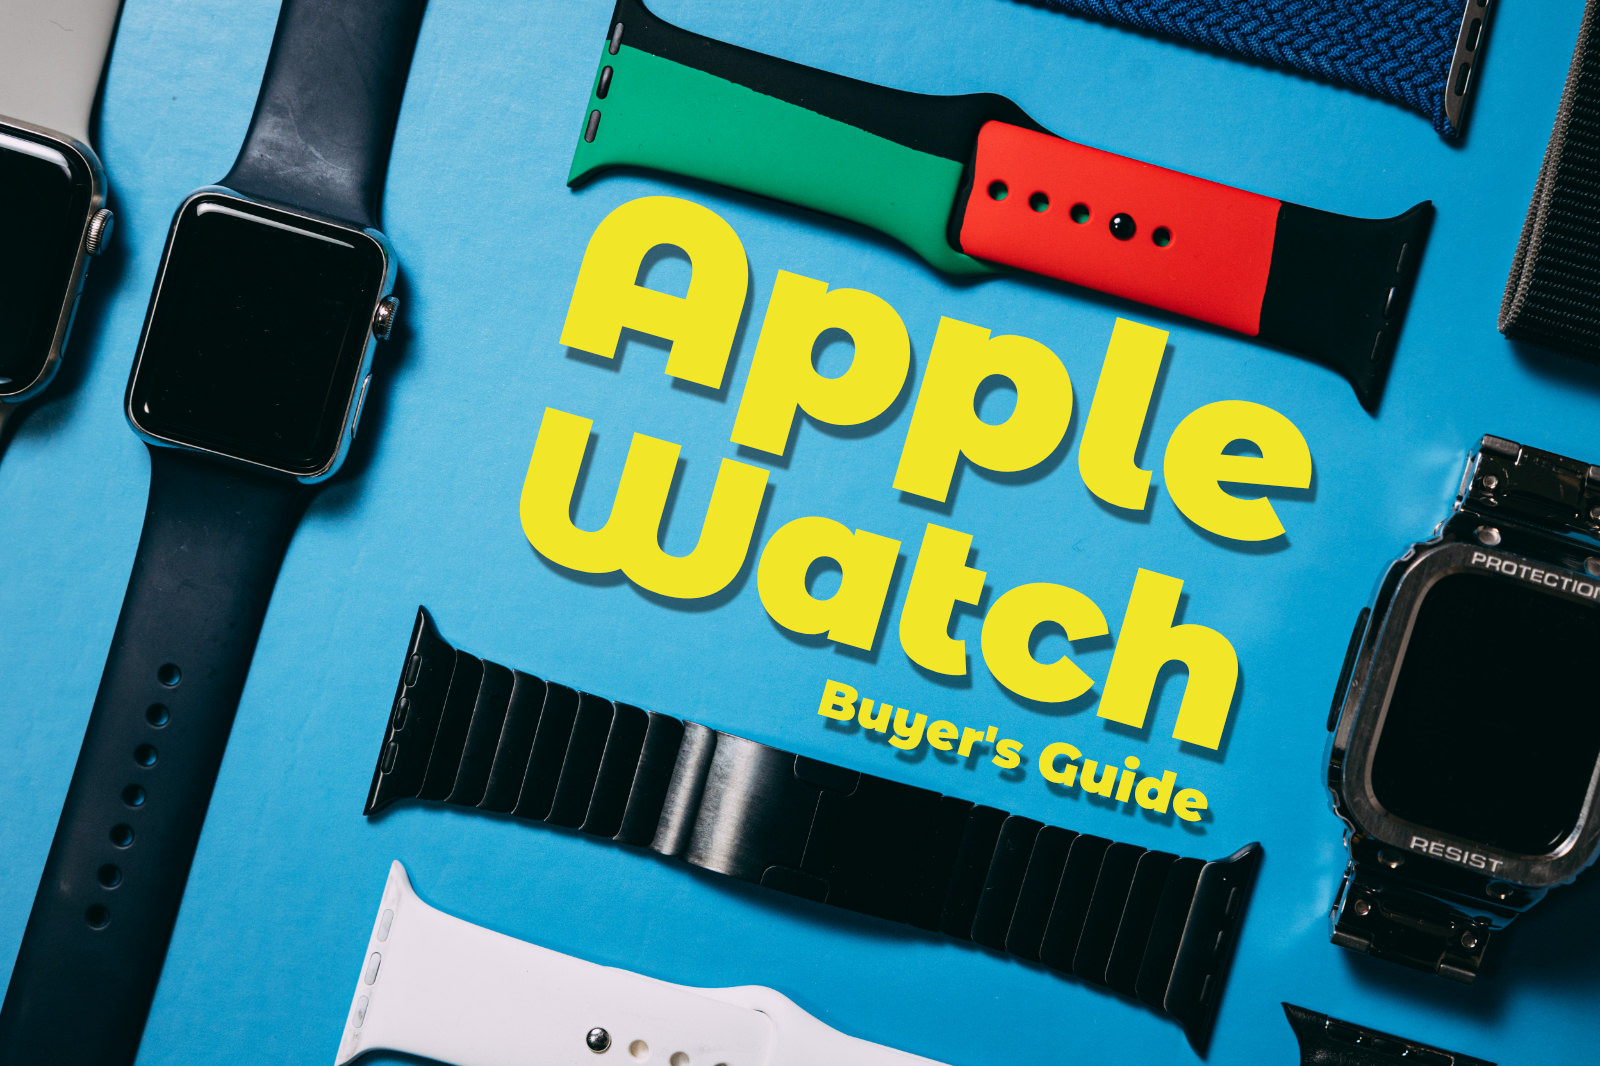 GoriMe Buyers Guide for AppleWatch